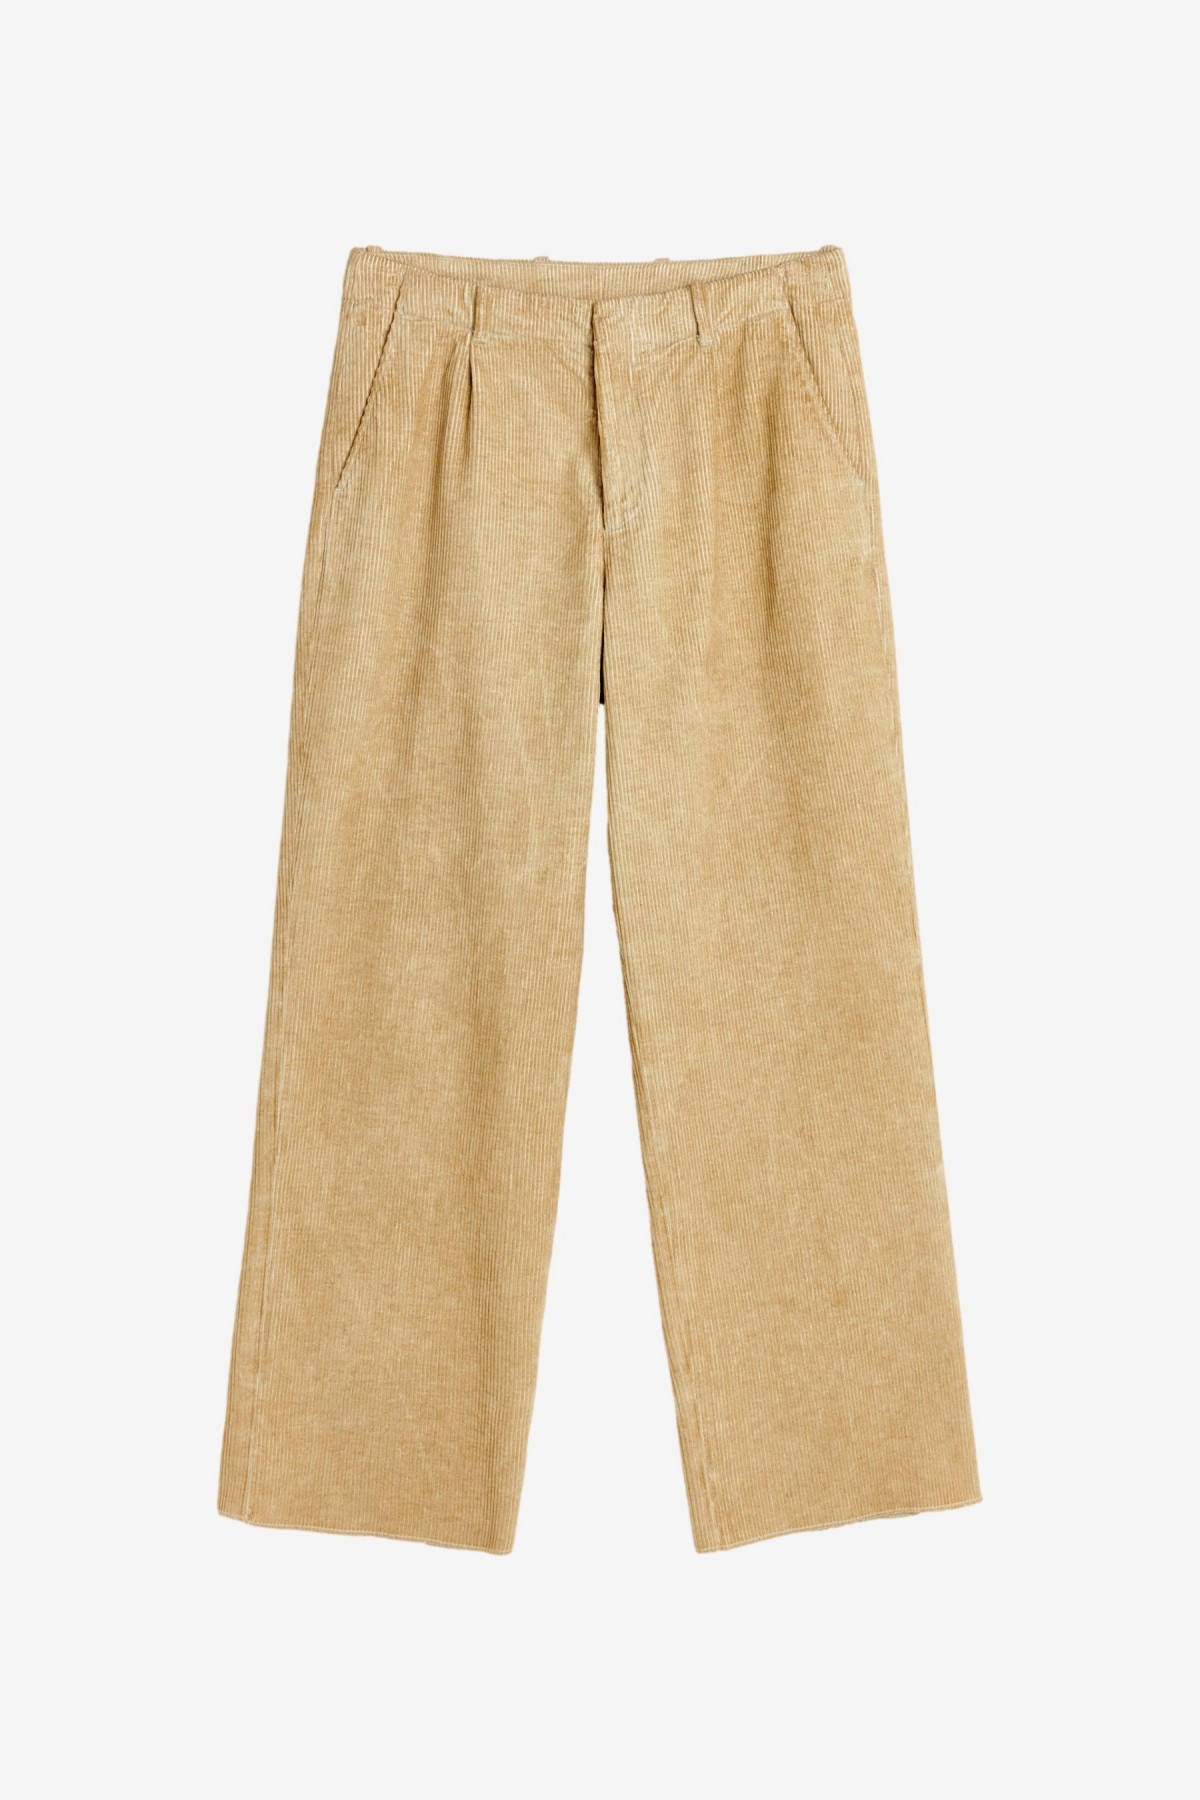 Our Legacy Borrowed Chino in Washed Oat Cotton Linen Cord